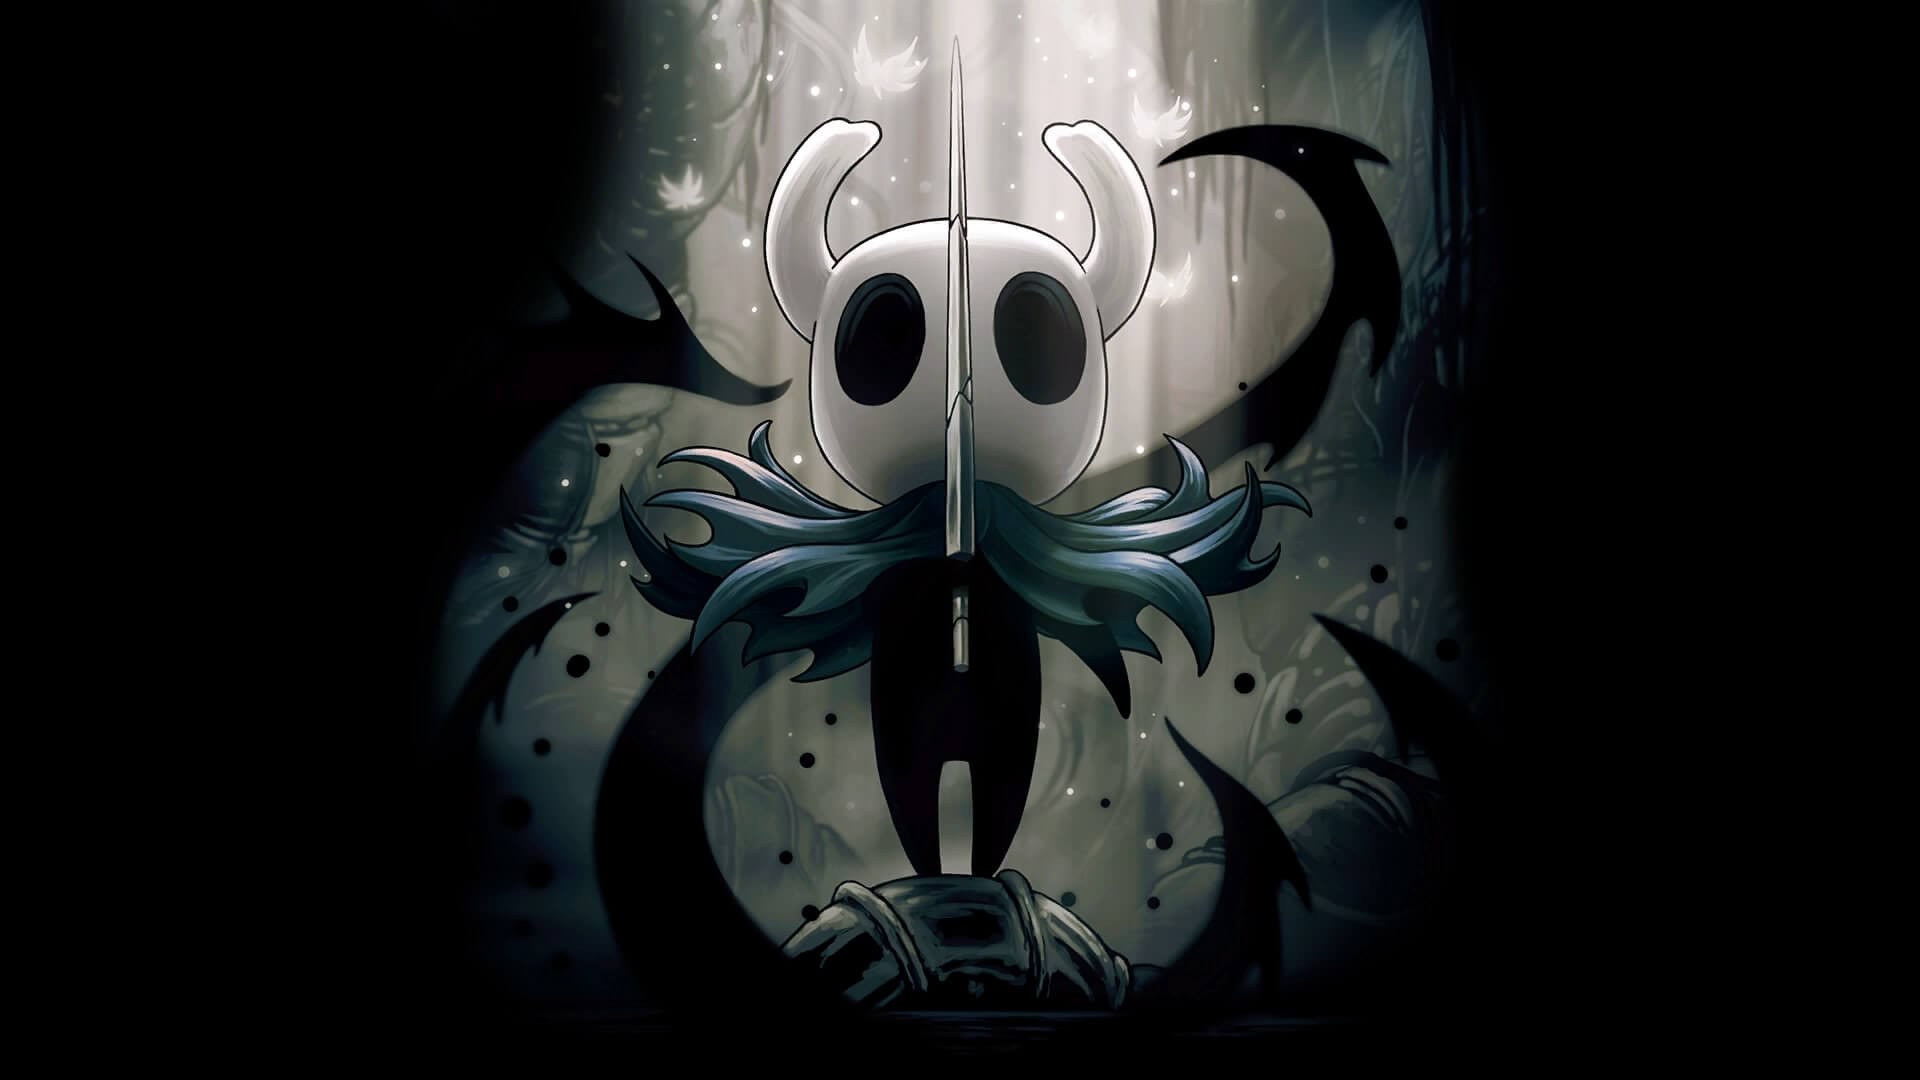 Hollow Knight Gameplay Wallpaper HD With high-resolution 1920X1080 pixel. You can use this wallpaper for your Desktop Computer Backgrounds, Mac Wallpapers, Android Lock screen or iPhone Screensavers and another smartphone device